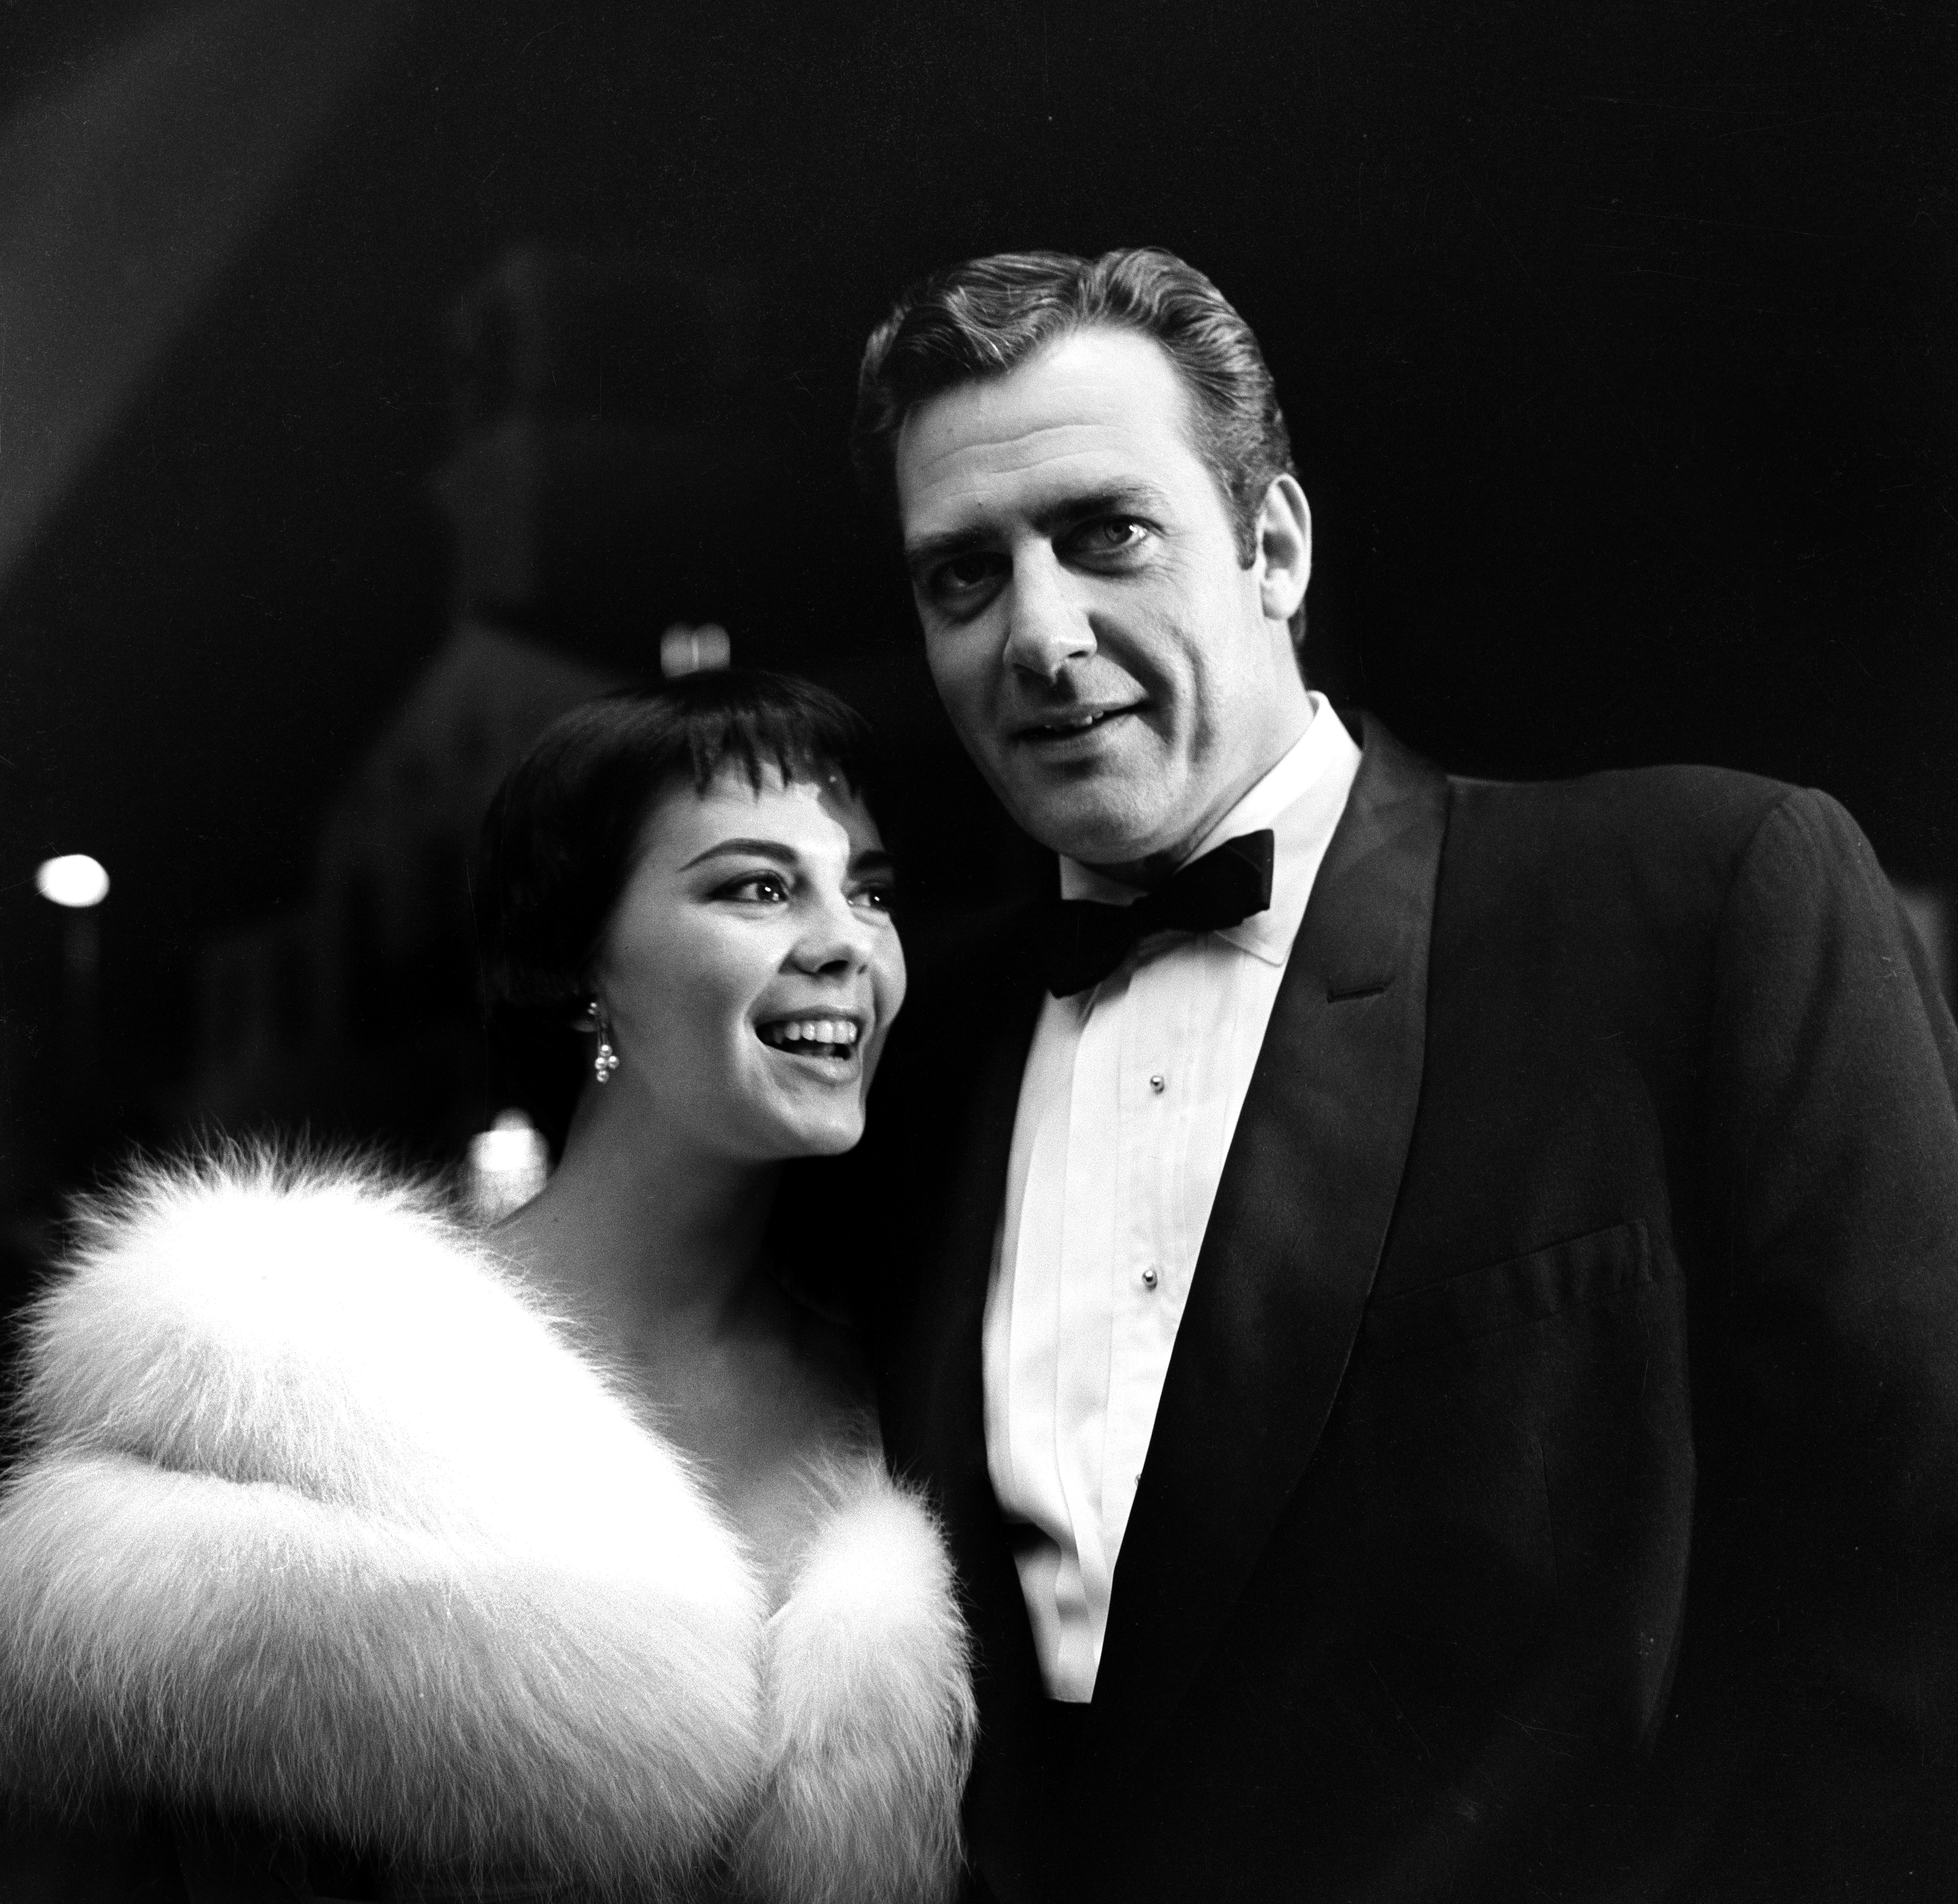 Natalie Wood with Raymond Burr in Los Angeles, California, 1956 | Source: Getty Images